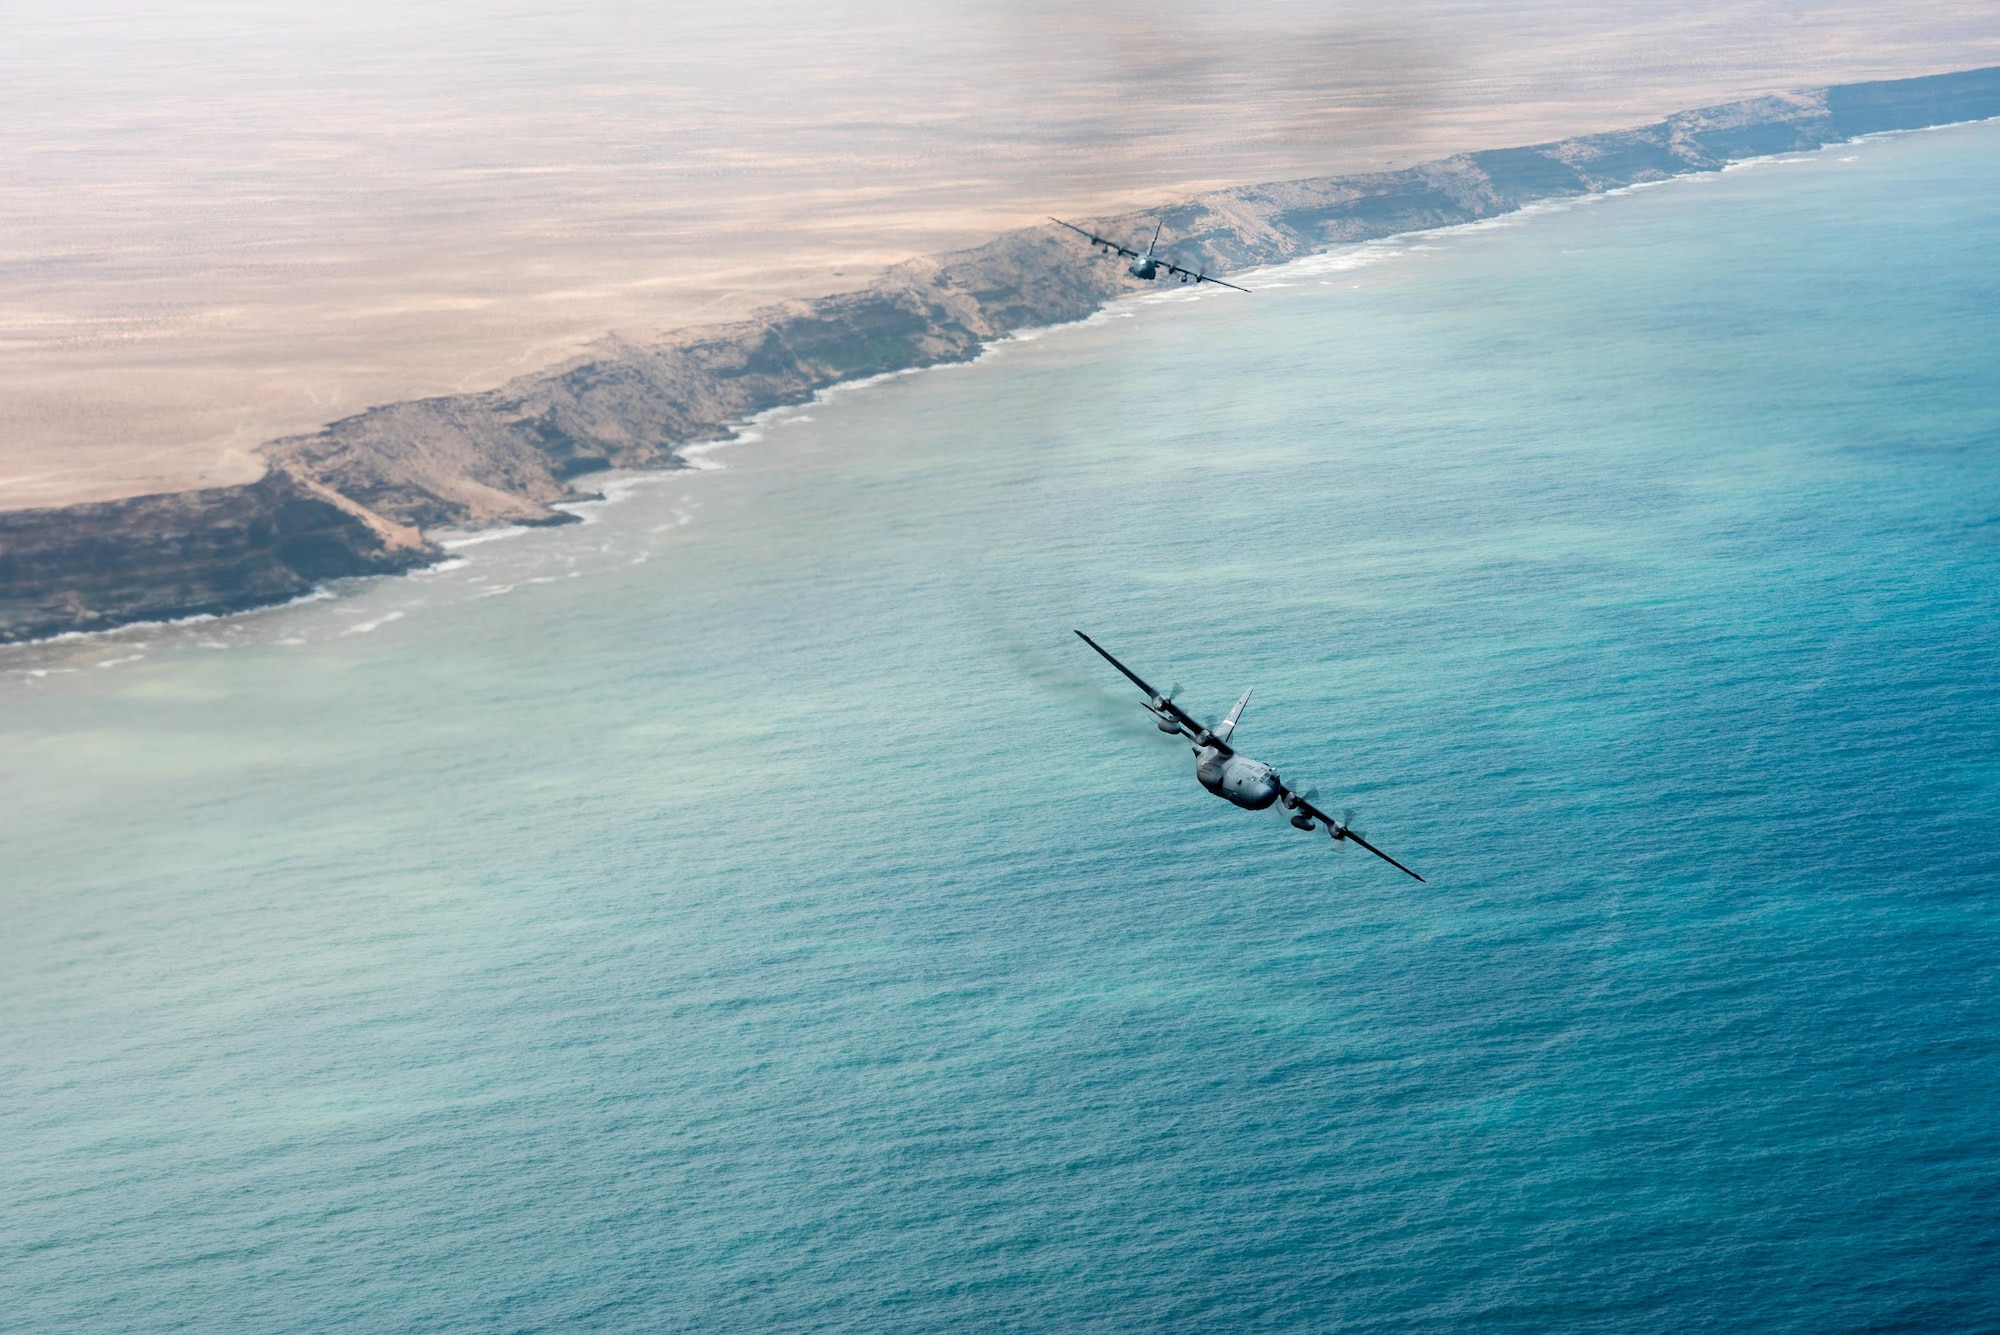 Two Kentucky Air National Guard C-130 Hercules fly over the coast of North Africa on April 25, 2017. Various units from the U.S. Marine Corps, U.S. Army, U.S. Navy, U.S. Air Force and the Kentucky and Utah Air National Guards will conduct multilateral and stability operations training with units from the Royal Moroccan Armed Forces in the Kingdom of Morocco. This combined multilateral exercise is designed to improve interoperability and mutual understanding of each nation’s tactics, techniques and procedures while demonstrating the strong bond between the nation’s militaries. (U.S. Air Force photo by Master Sgt. Phil Speck)